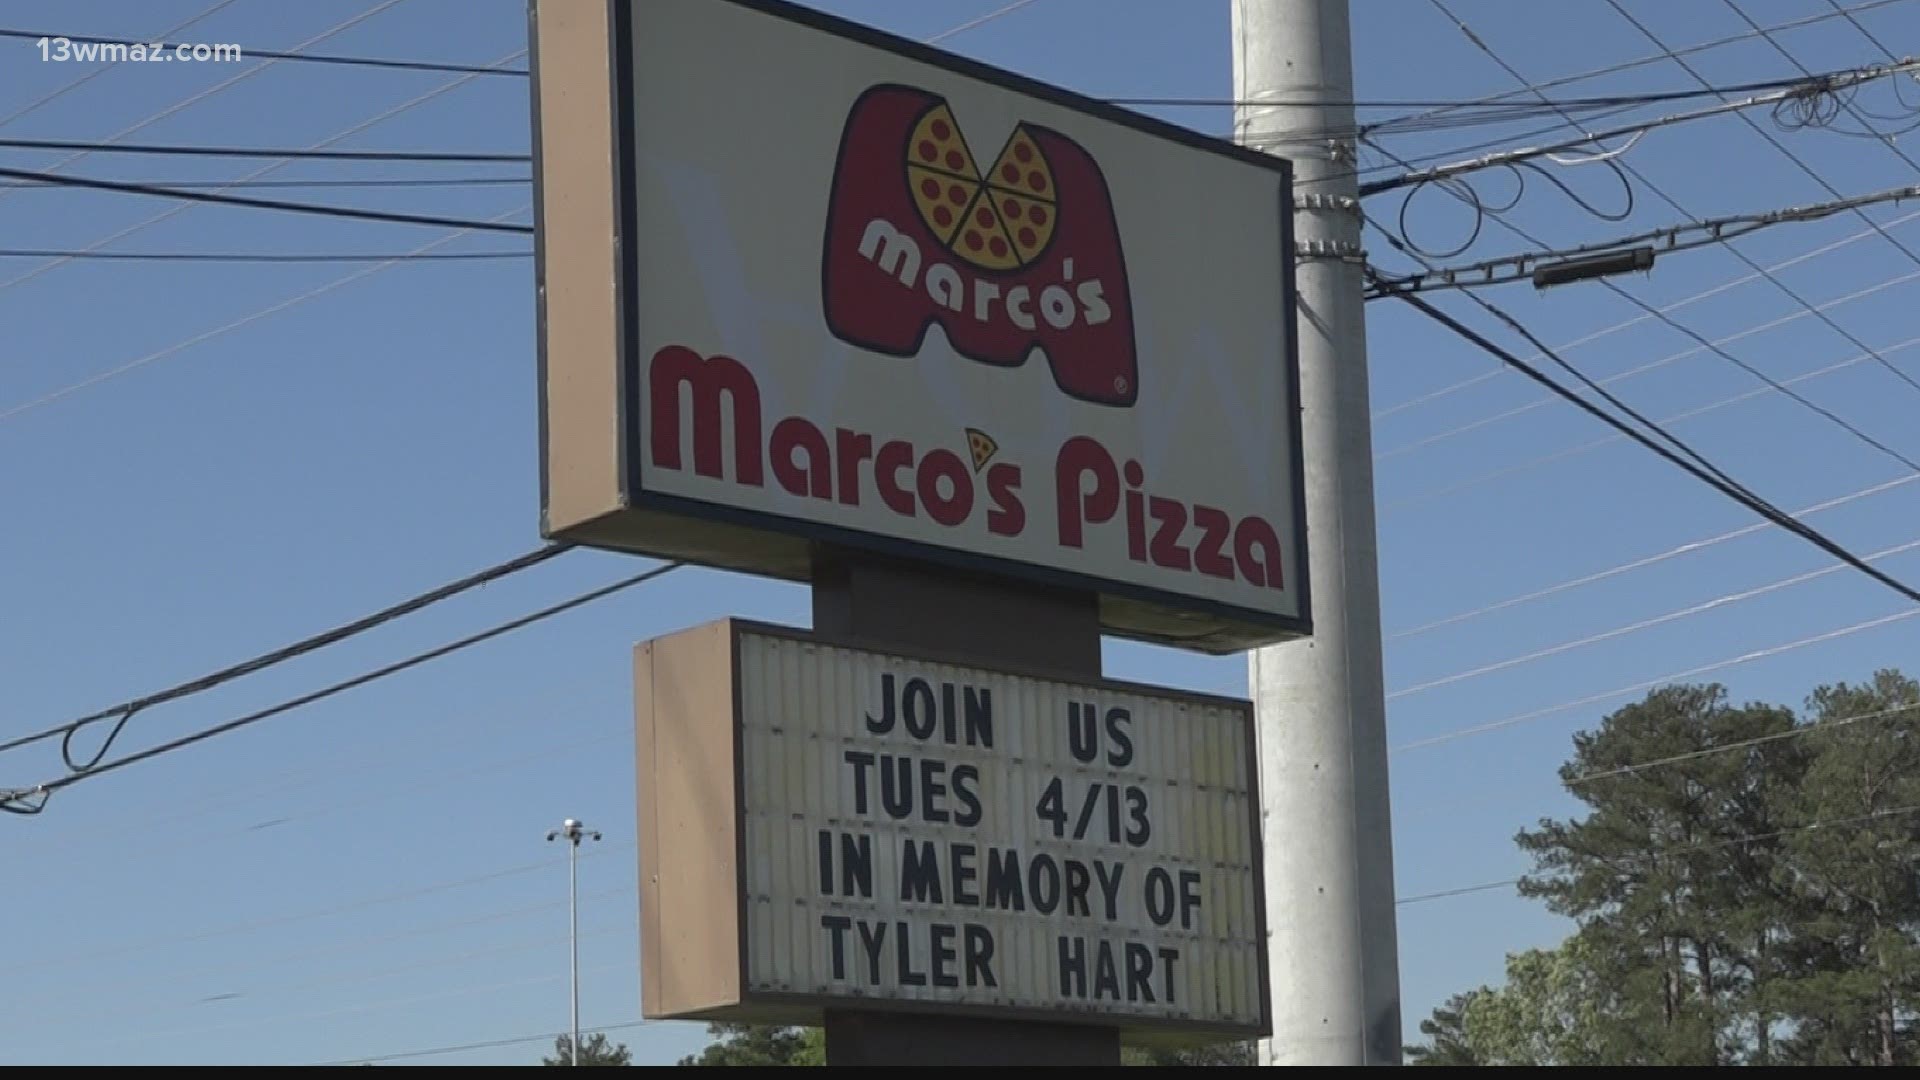 Tyler Hart worked at Marco's Pizza for nine months. He was killed in a car accident last weekend. Now, the pizza shop is hosting a fundraiser for his family.